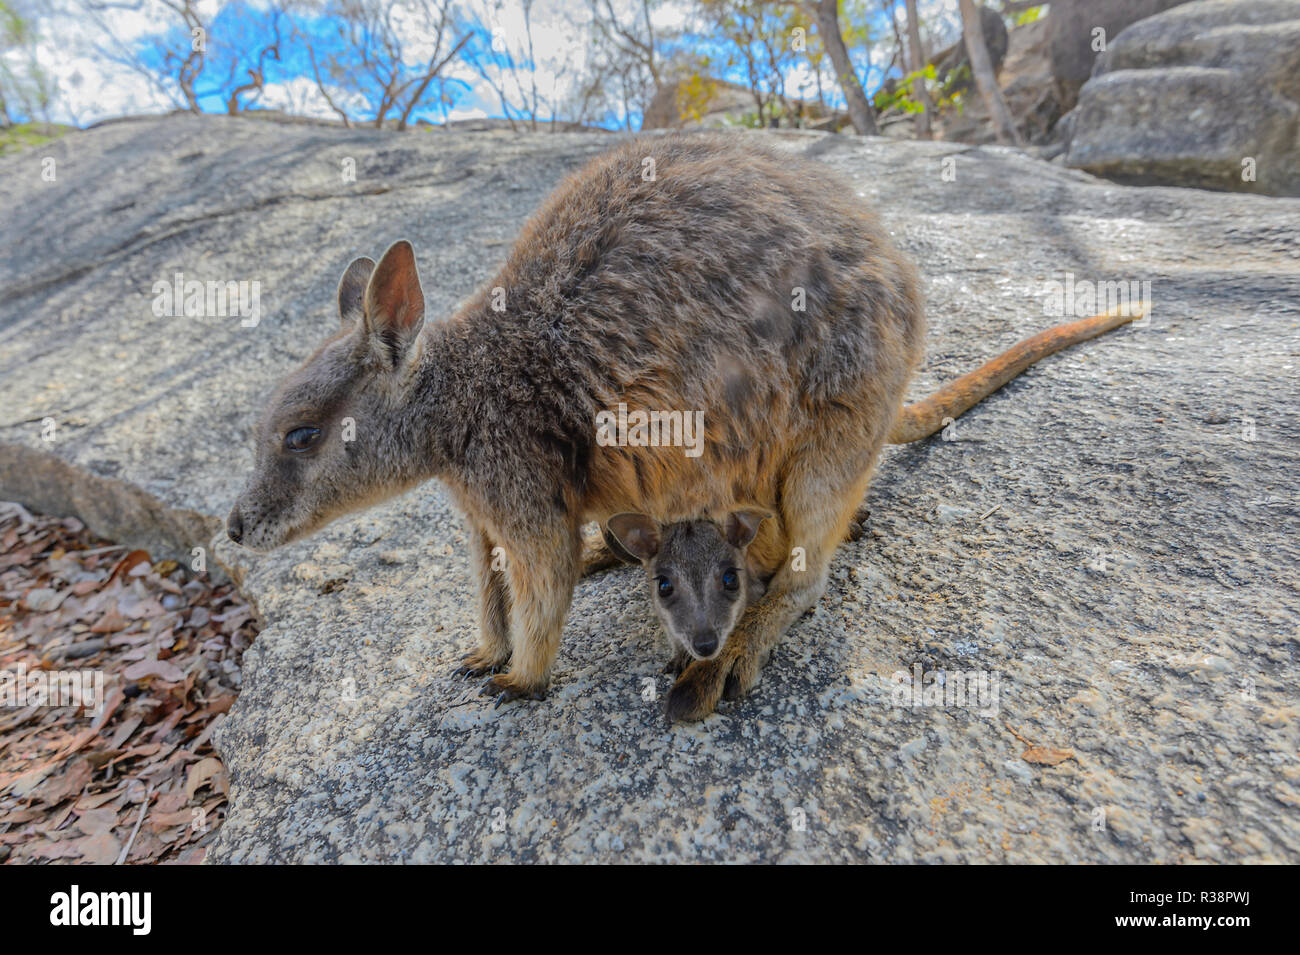 Endangered Mareeba Unadorned Rock Wallaby with joey in her pouch (Petrogale inornata, Mareeba race), Granite Gorge Nature Park, Atherton Tablelands, F Stock Photo